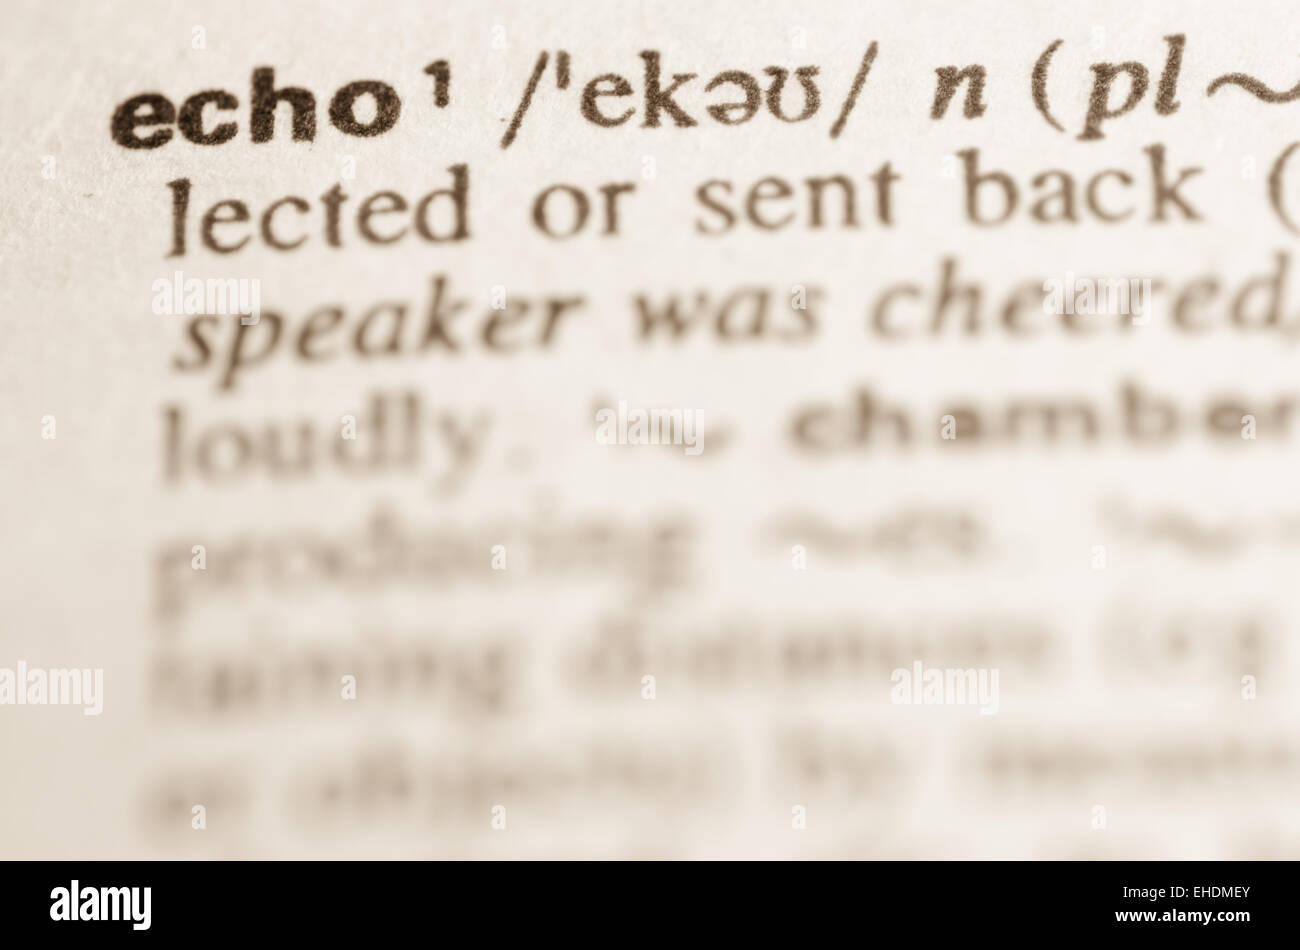 Definition of word echo in dictionary Stock Photo - Alamy